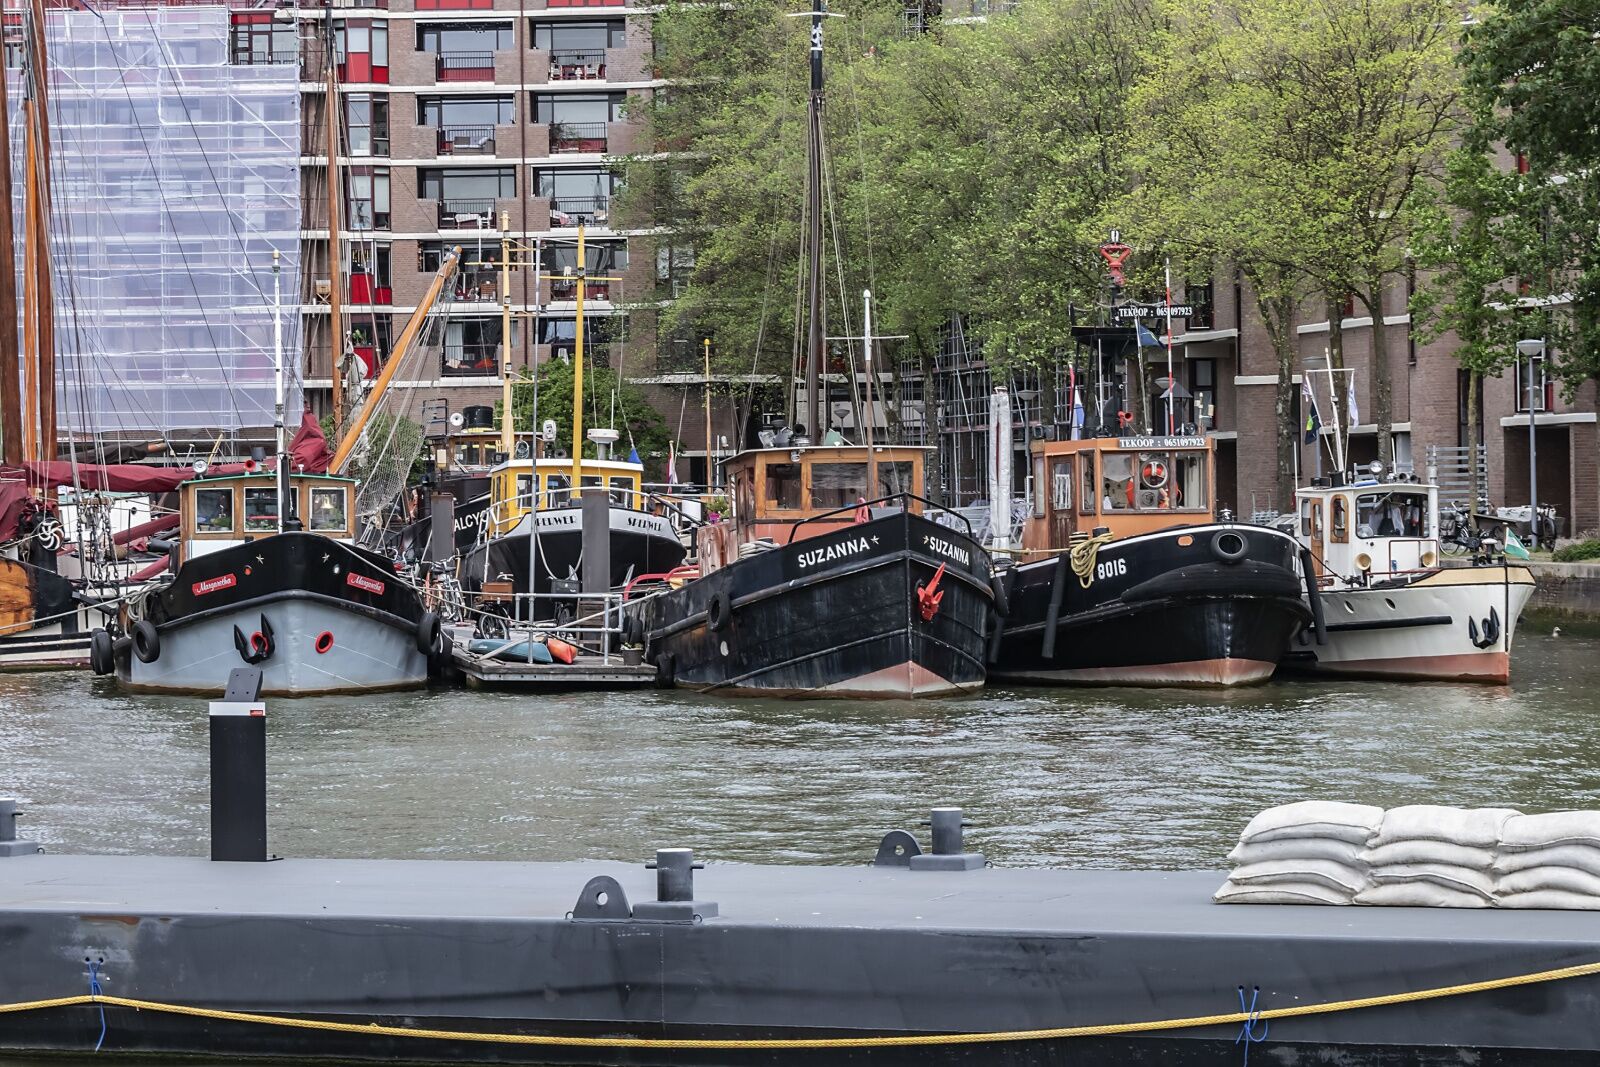 maritime museum in rotterdam - boats in water